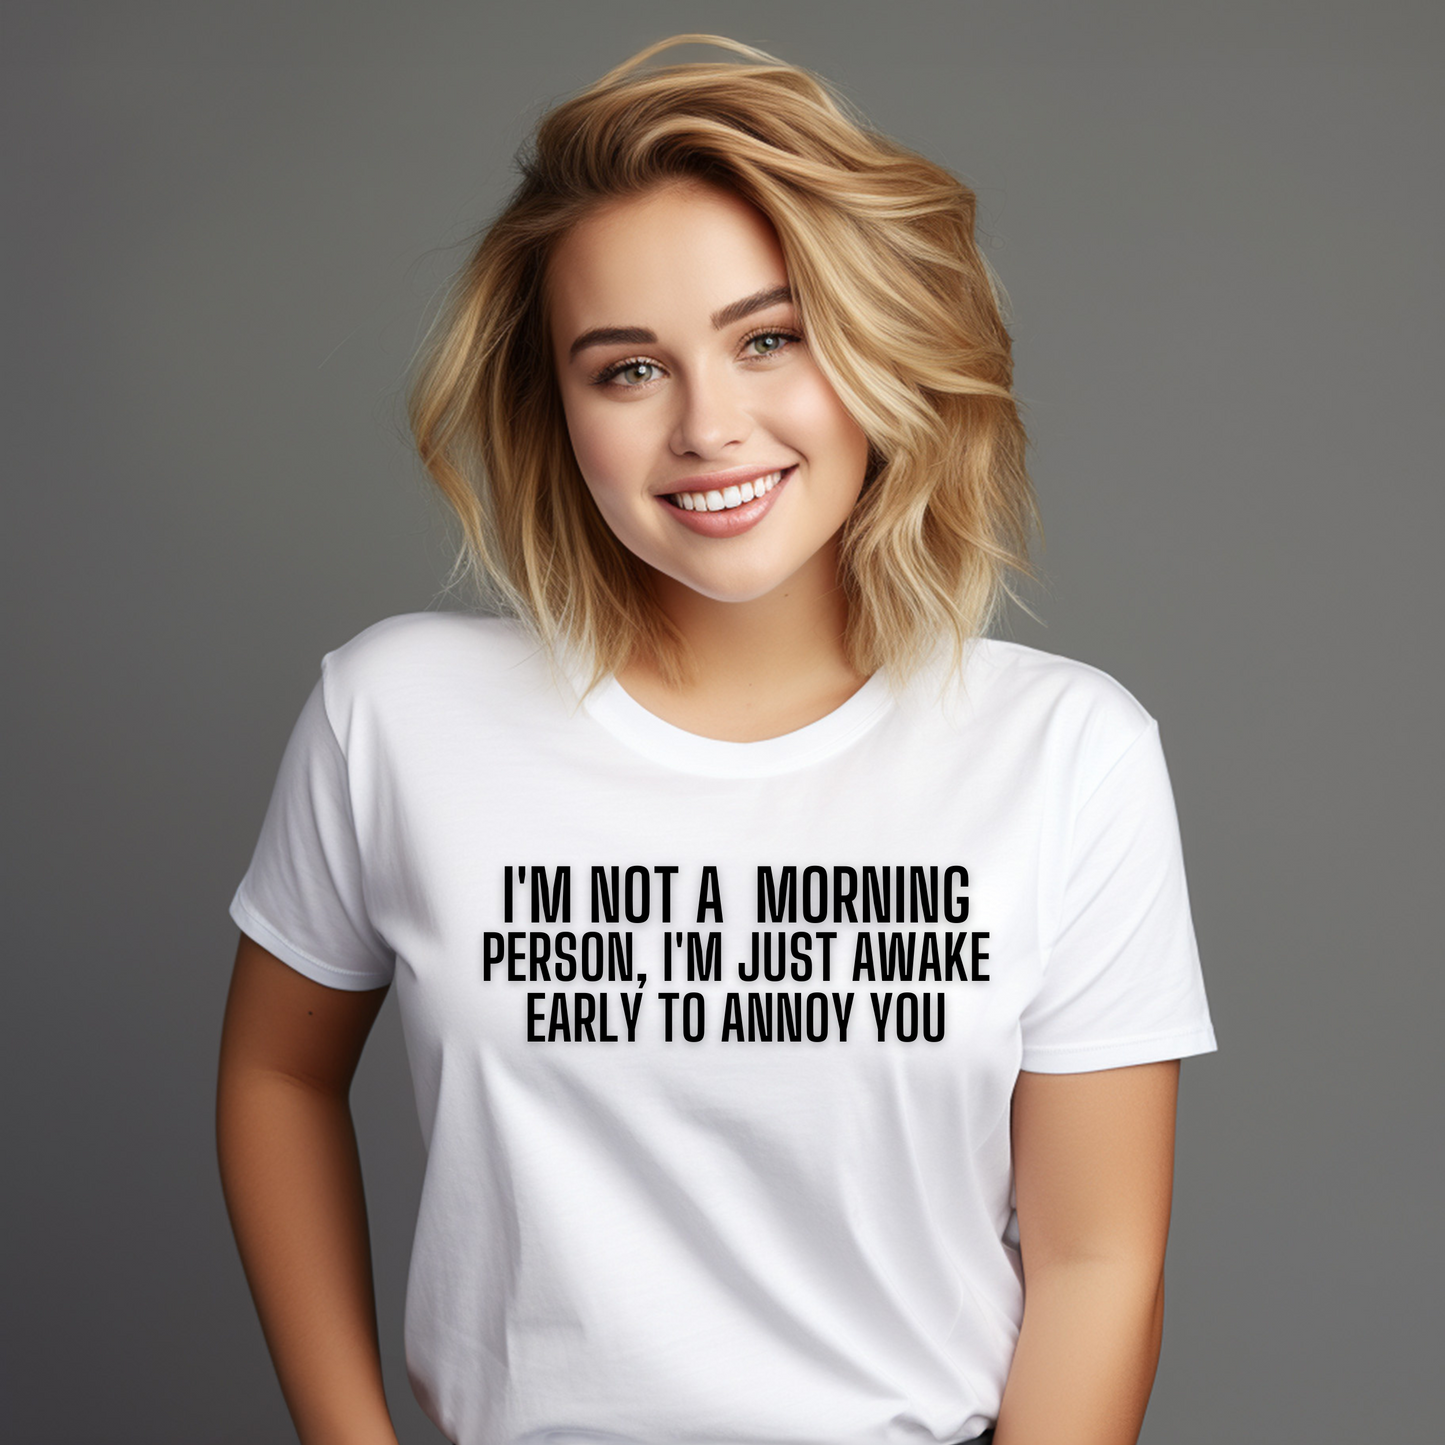 I'm not a morning person, I'm just awake early to annoy you - Premium t-shirt - Shop now at Lees Krazy Teez